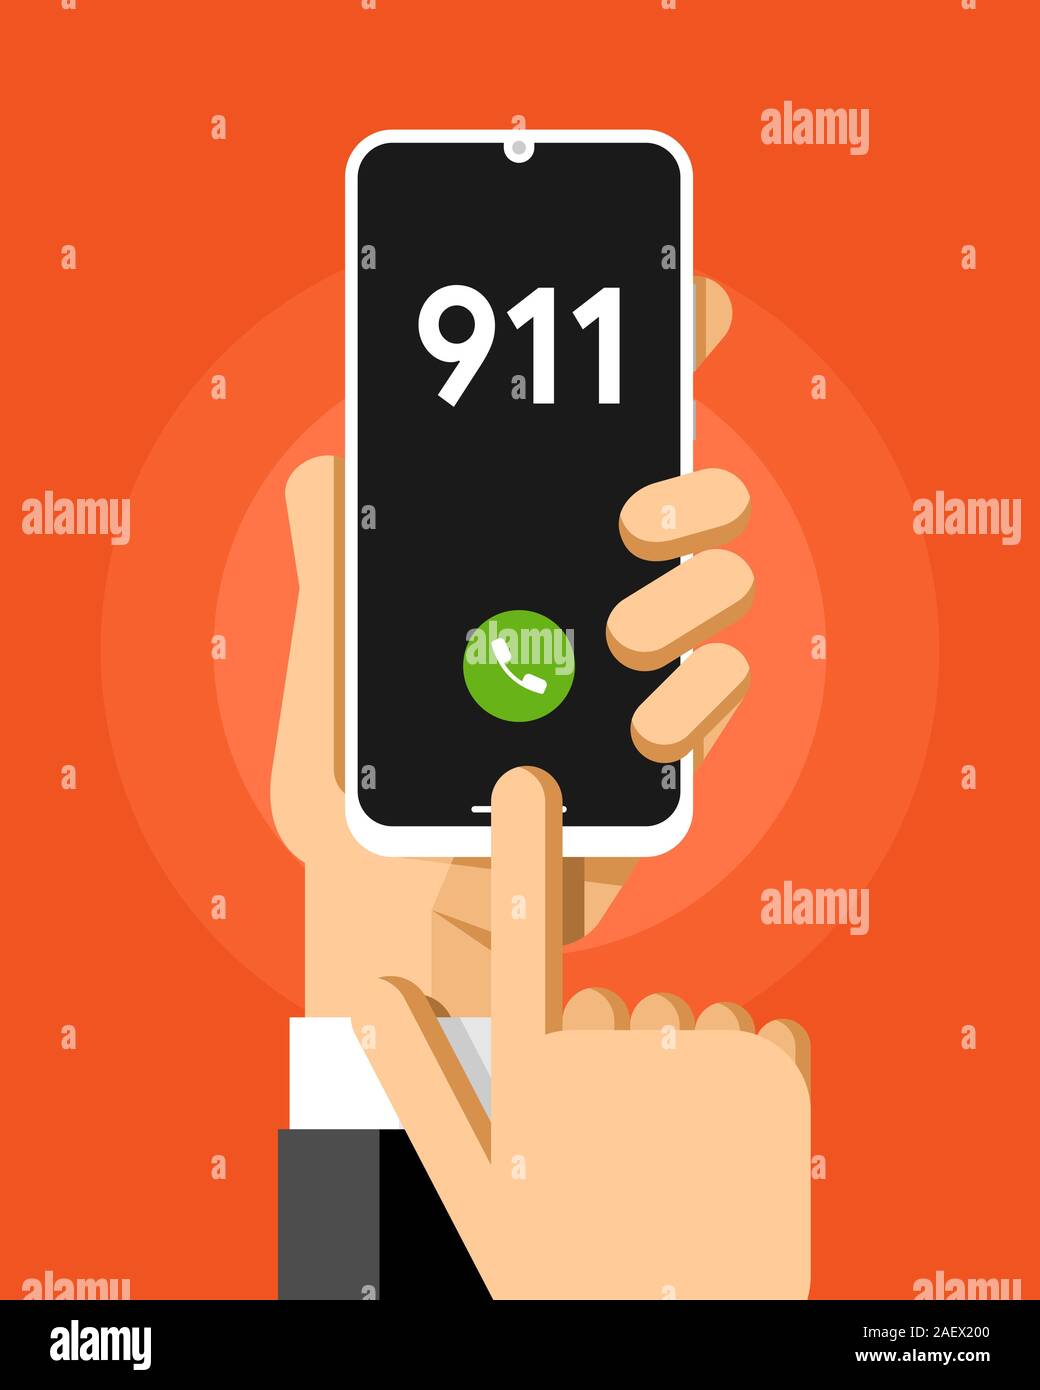 Smartphone mockup in human hand. 911 rescue phone number. Vector colorful technology illustration Stock Vector